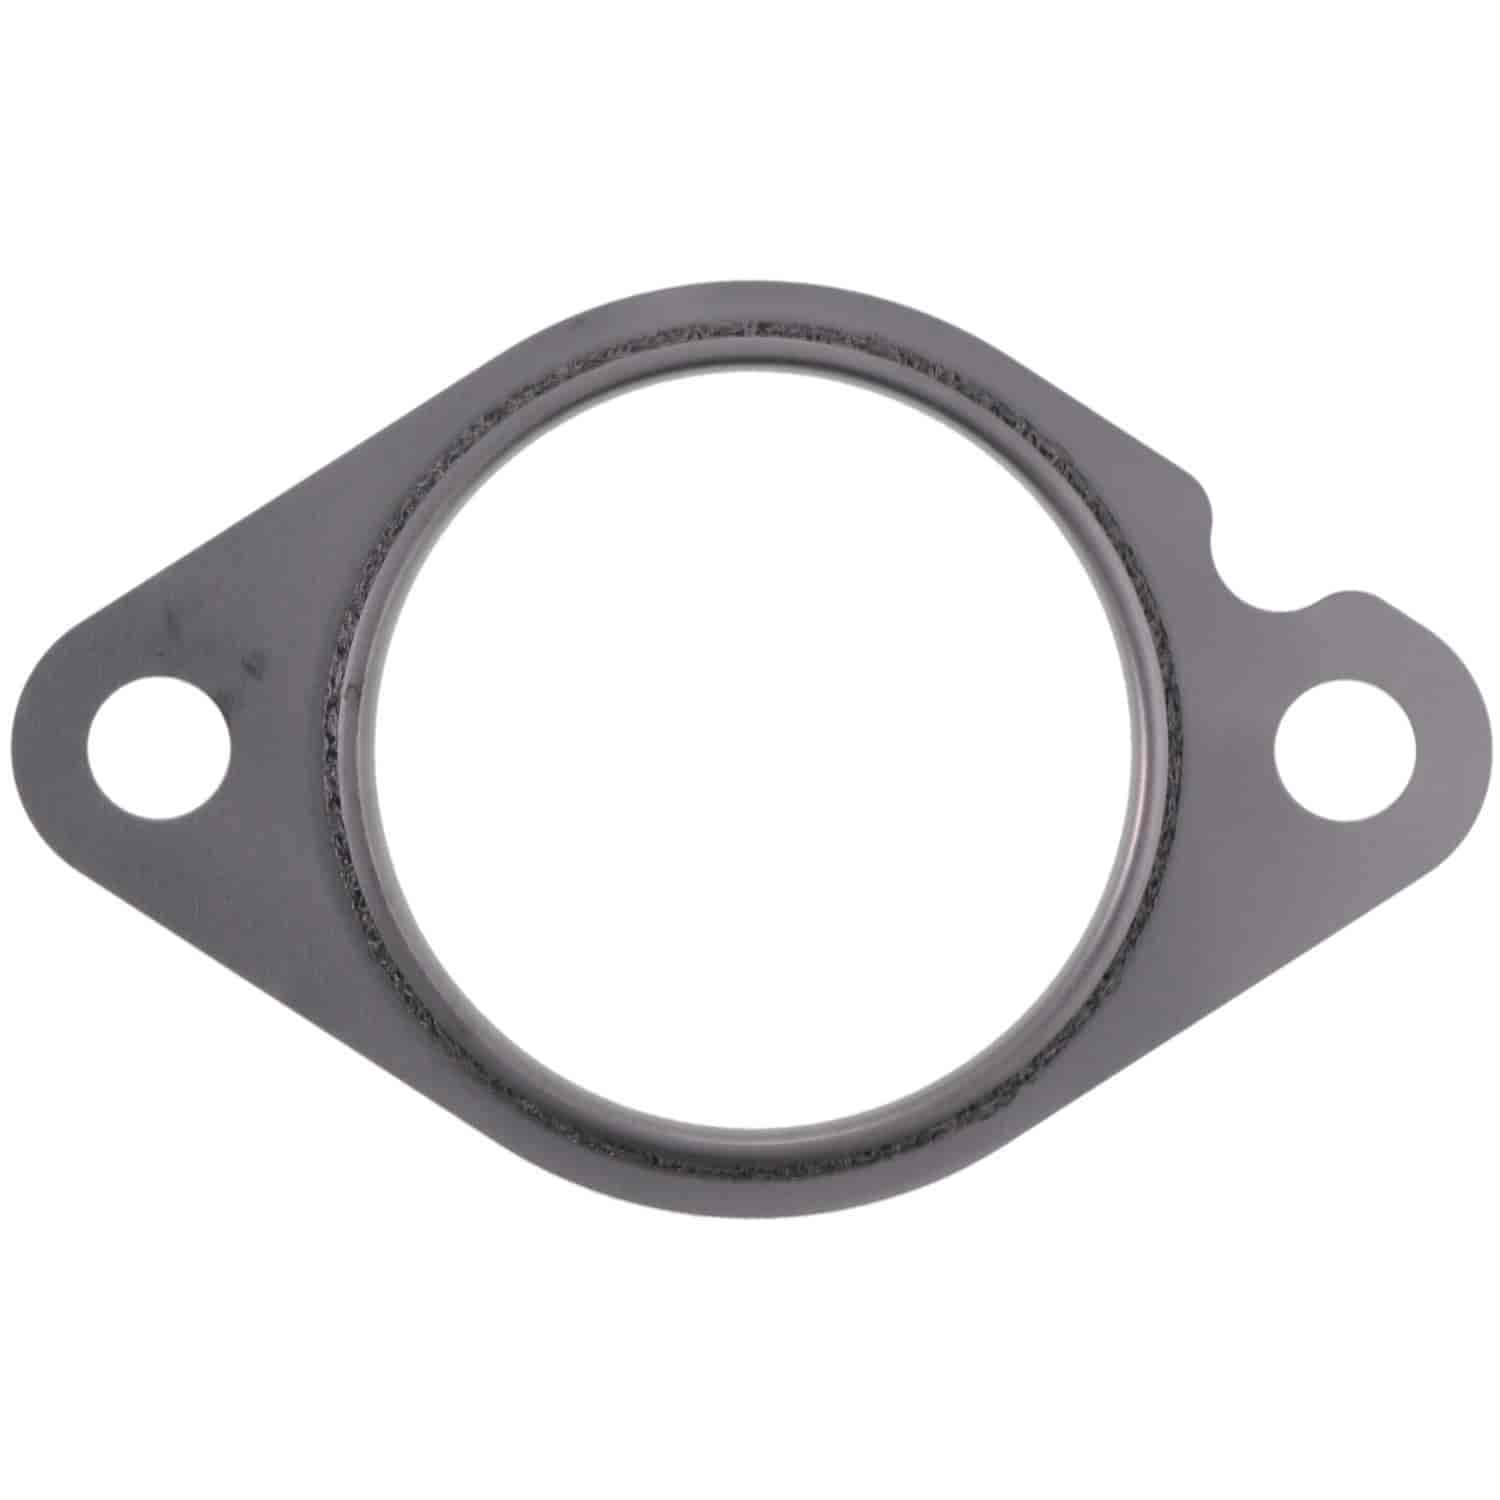 Exhaust Pipe Flange Gasket FORD 2.0L DOHC DURATEC 2005-2011 FOCUS FLEXPIPE TO MUFFLER